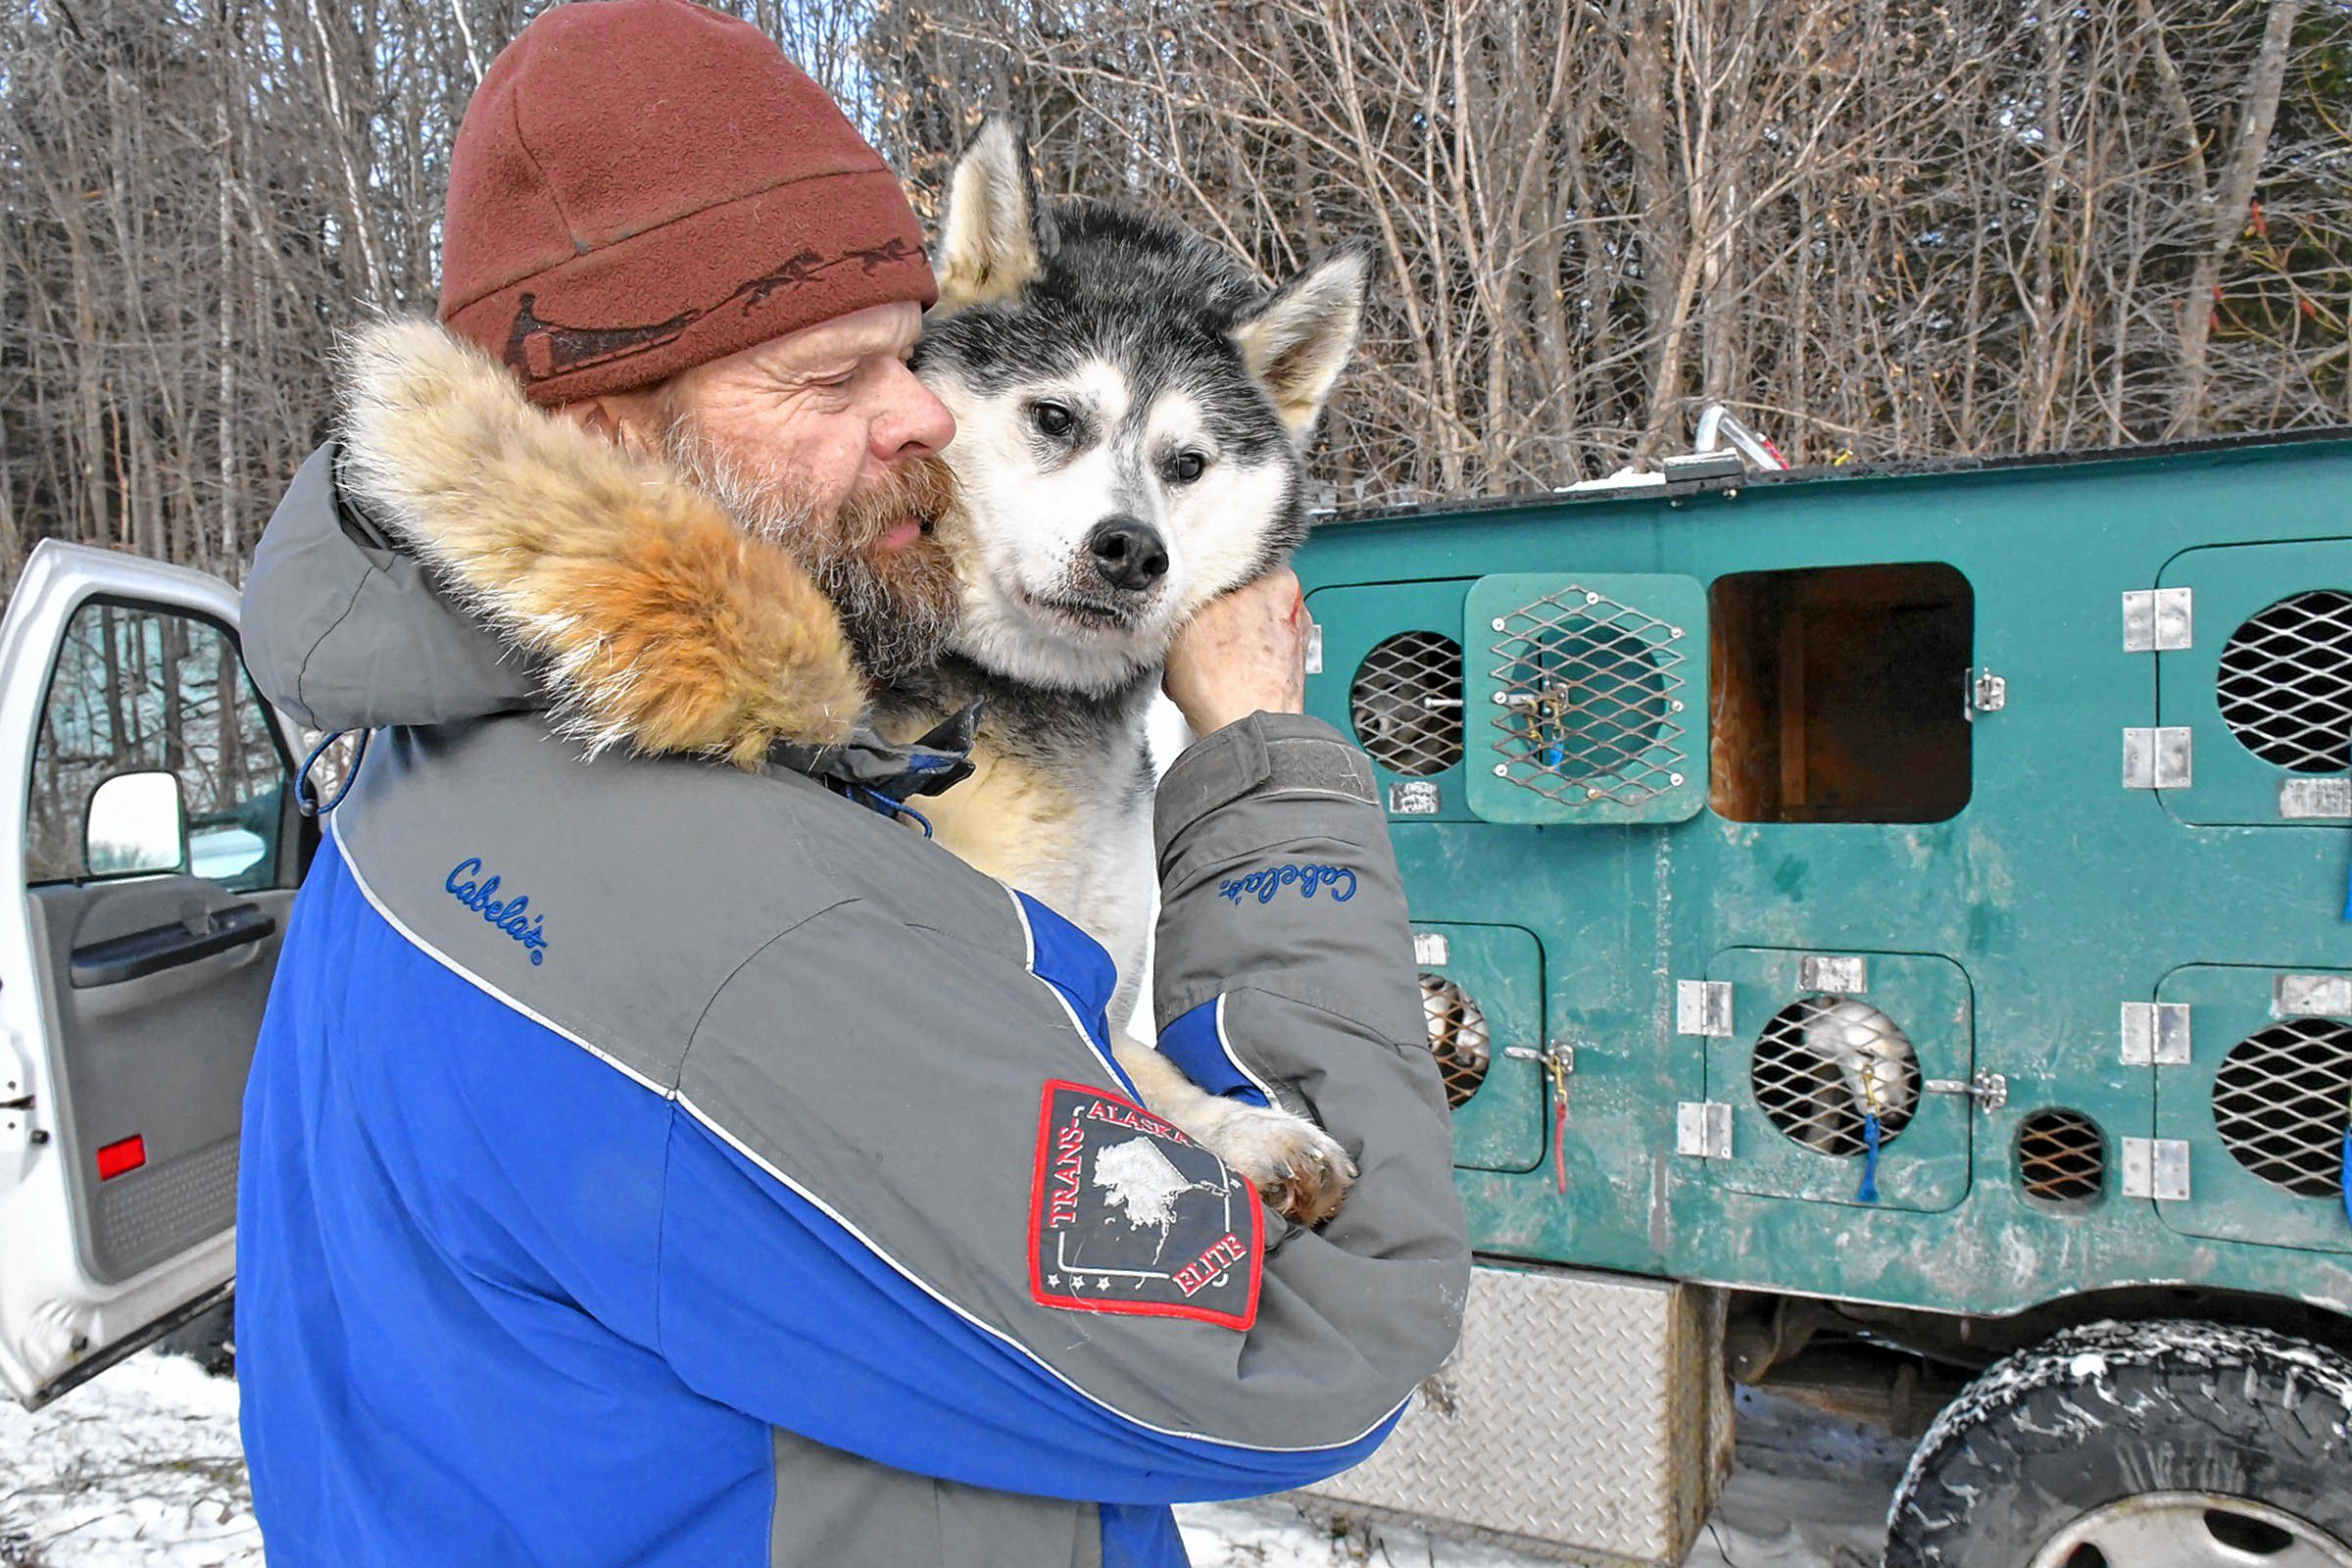 Alex MacLennan of Windsor, Vt., who is co-owner of Braeburn Siberians, pauses to spend a moment with Anakin, the patriarch of his sled dog team while lifting him down from his truck kennel in Claremont, N.H., on Sun. Dec. 22, 2019. Anakin is the grandfather of most of MacLennan's dogs and though nearly blind still likes to pull sleds while being guided by the dog harnessed next to him. (Rick Russell photograph)